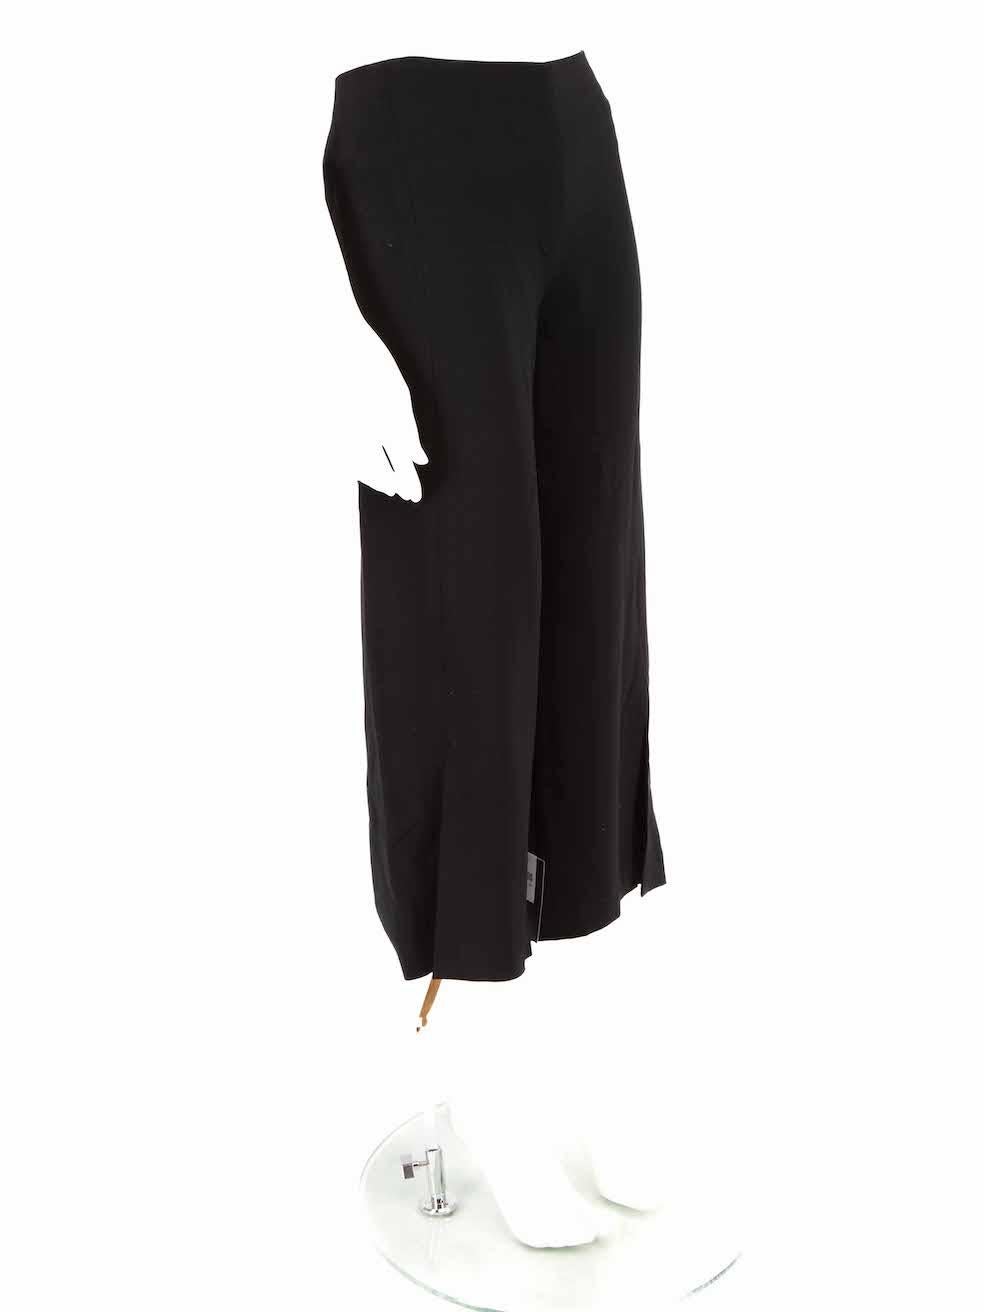 CONDITION is Never worn, with tags. No visible wear to trousers is evident on this new The Row designer resale item.
 
 
 
 Details
 
 
 Paber model
 
 Black
 
 Viscose
 
 Wide leg trousers
 
 Cropped length
 
 Slit on leg hem
 
 High rise
 
 Side